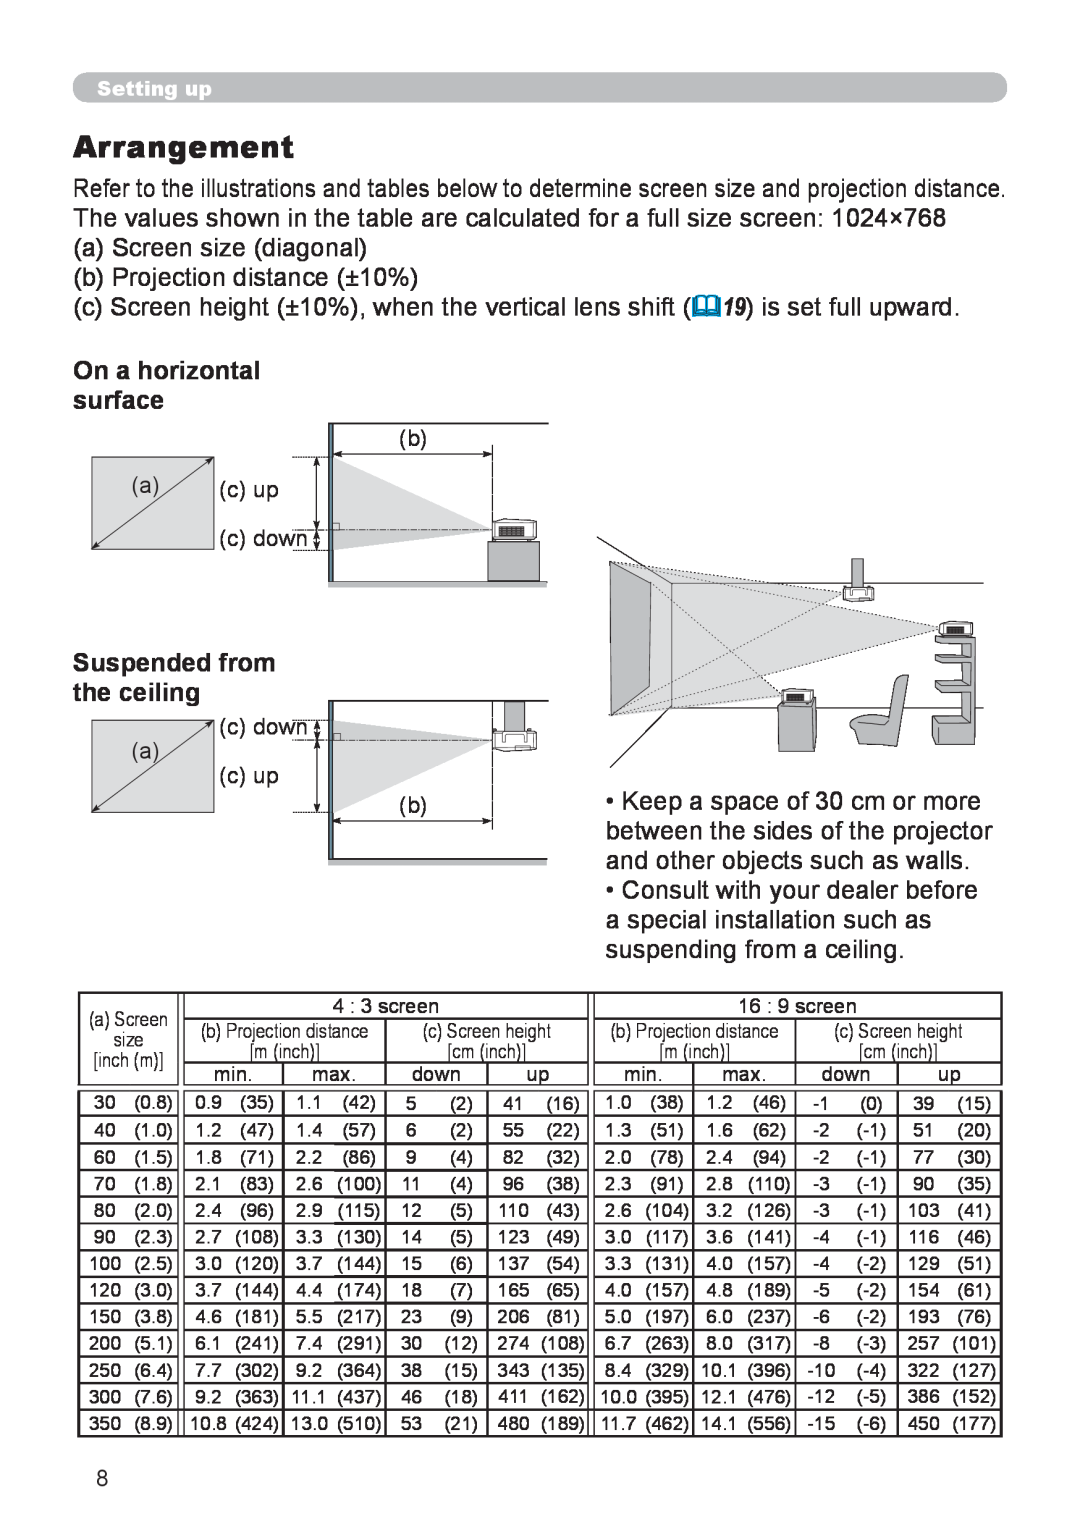 Planar PR9020 user manual Arrangement, On a horizontal, surface, Suspended from the ceiling 